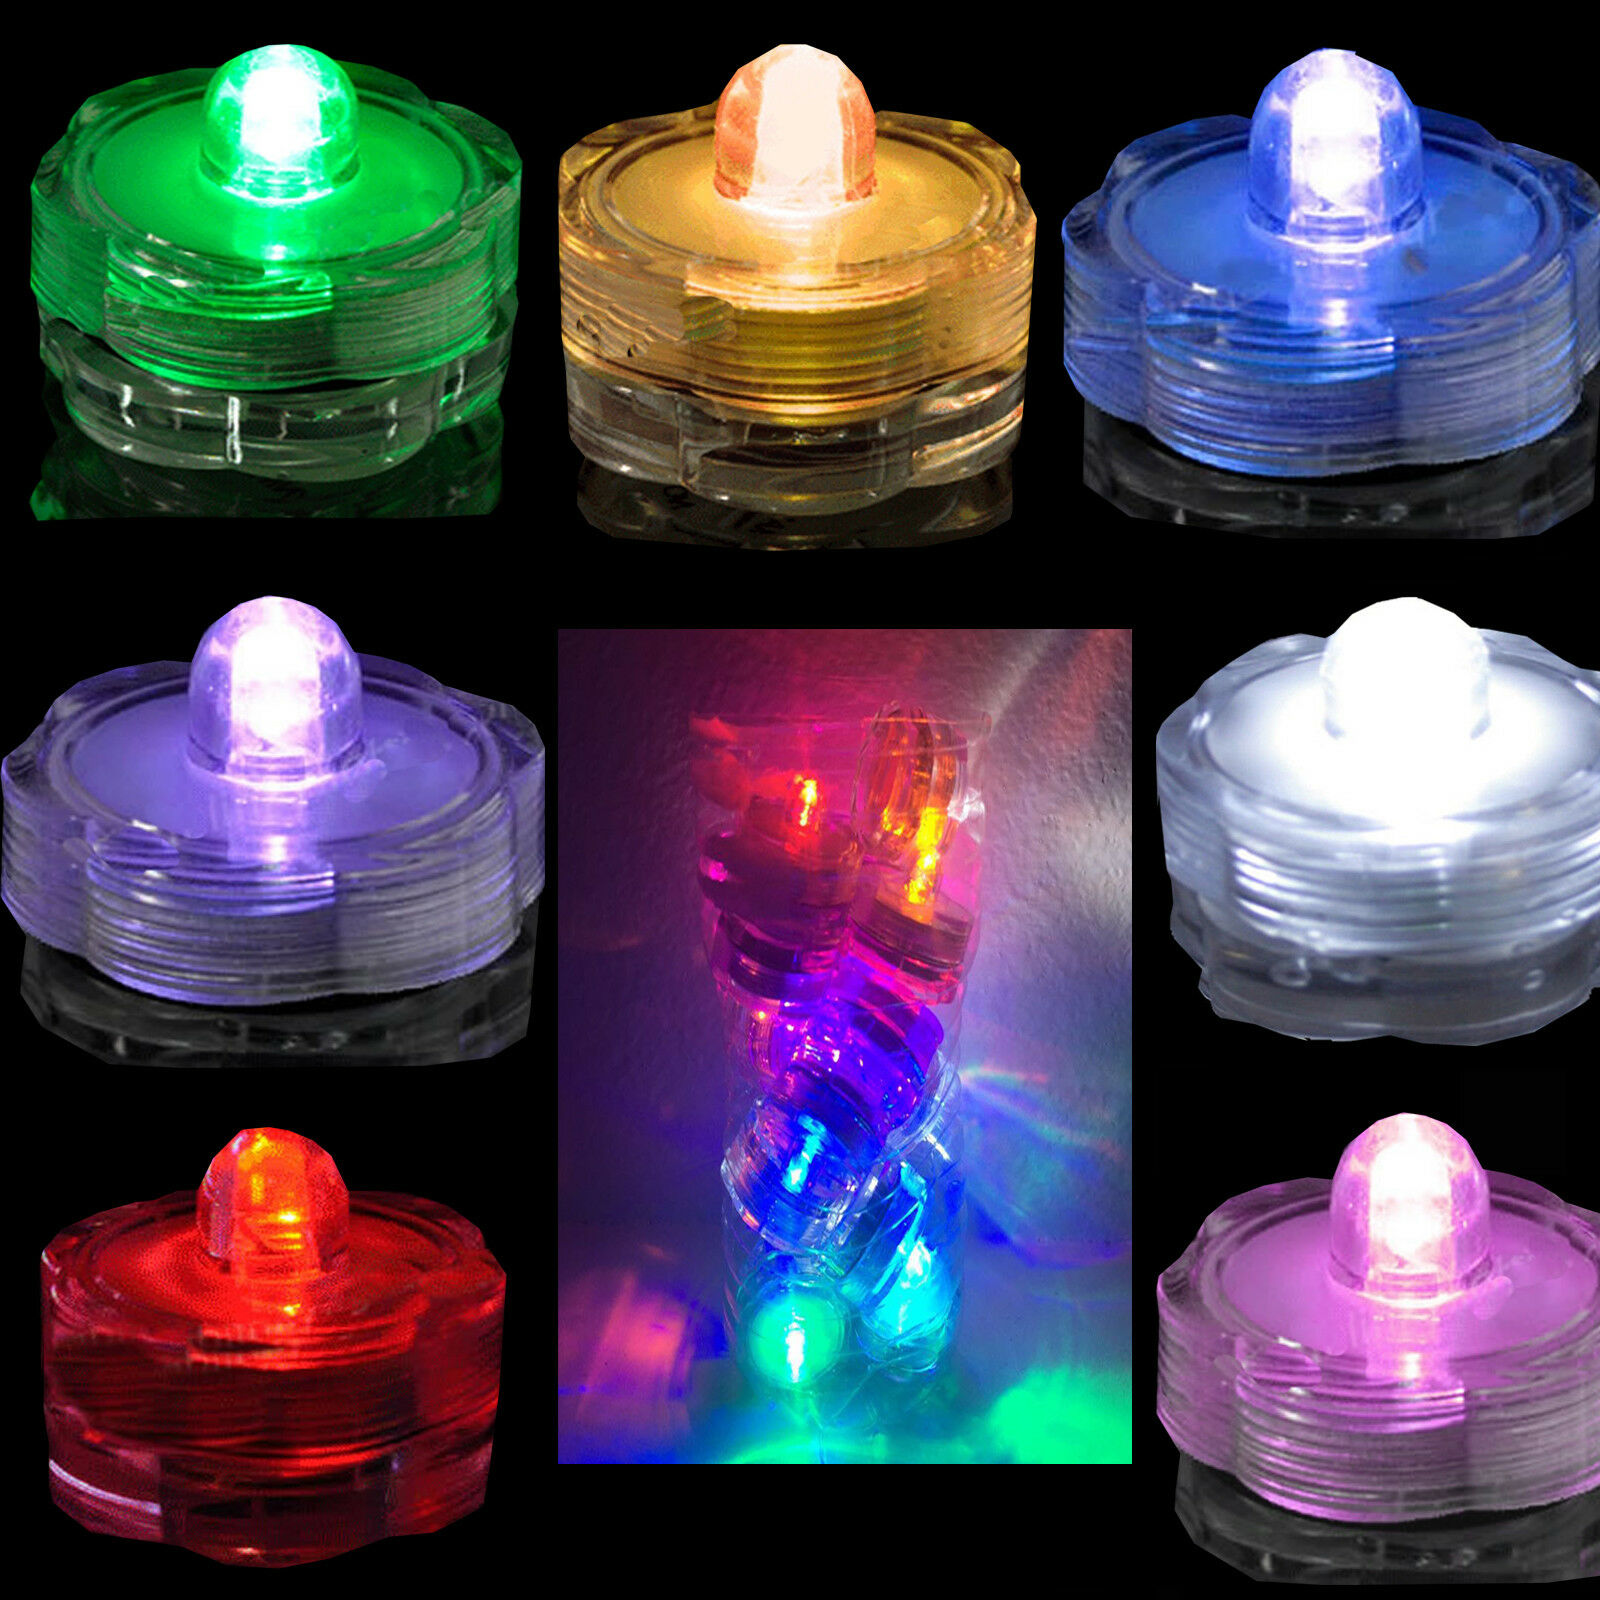 5 10 20 30 Bright Submersible Led Floral Tea Light Vase Party Wedding Waterproof